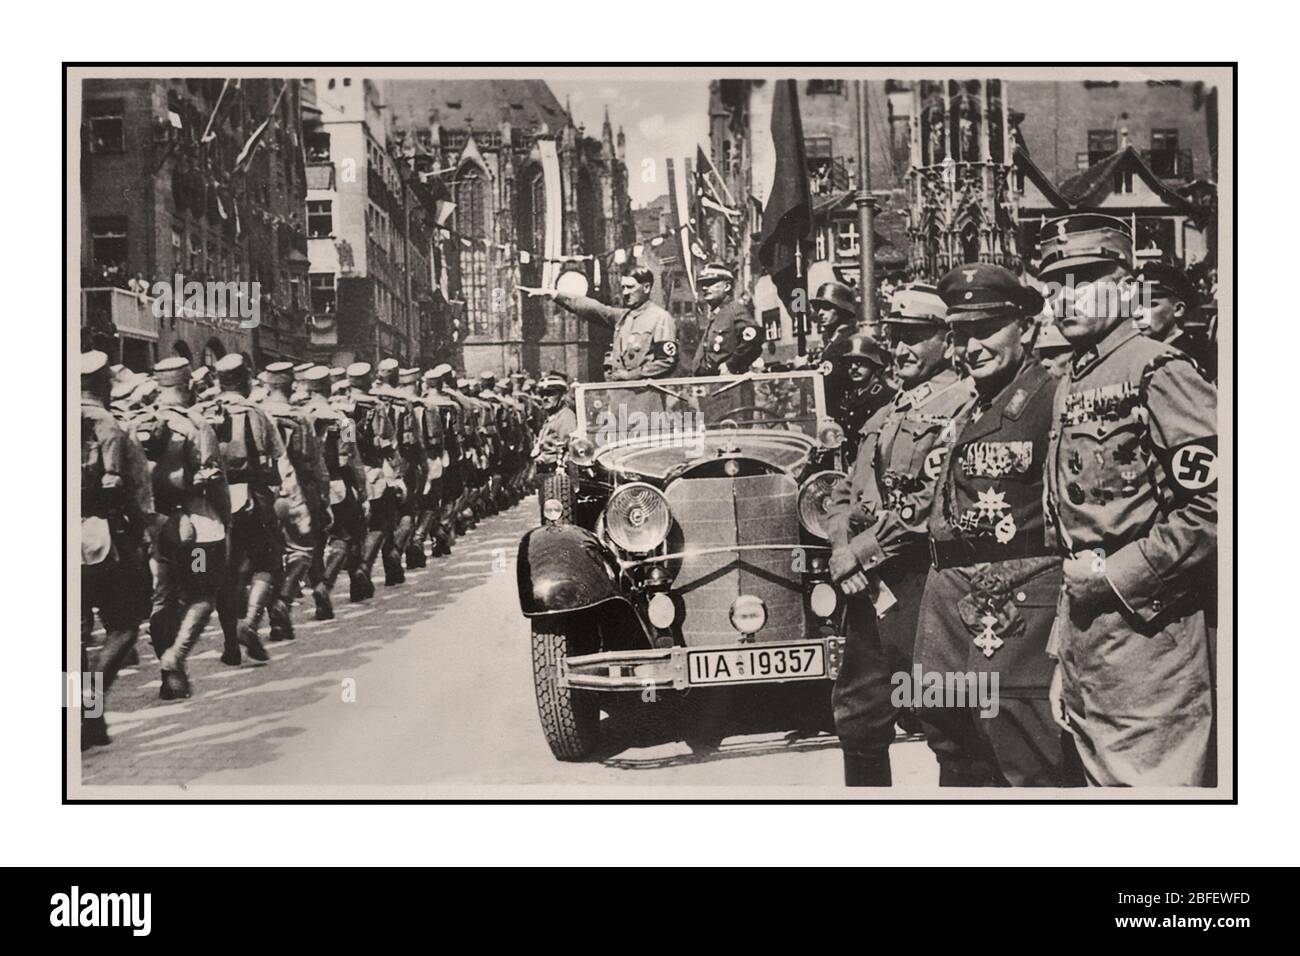 Vintage Nuremberg Rally 1935, Germany - SA Sturmabteilung political militia troops of the Nazi party, march past Adolf Hitler during a parade in the city. 1930’s Adolf Hitler wearing swastika armband in military parade, standing in Mercedes open car with Heil Hitler salute to passing marching Sturmabteilung troops Hermann Goring in foreground Nuremberg Germany Stock Photo